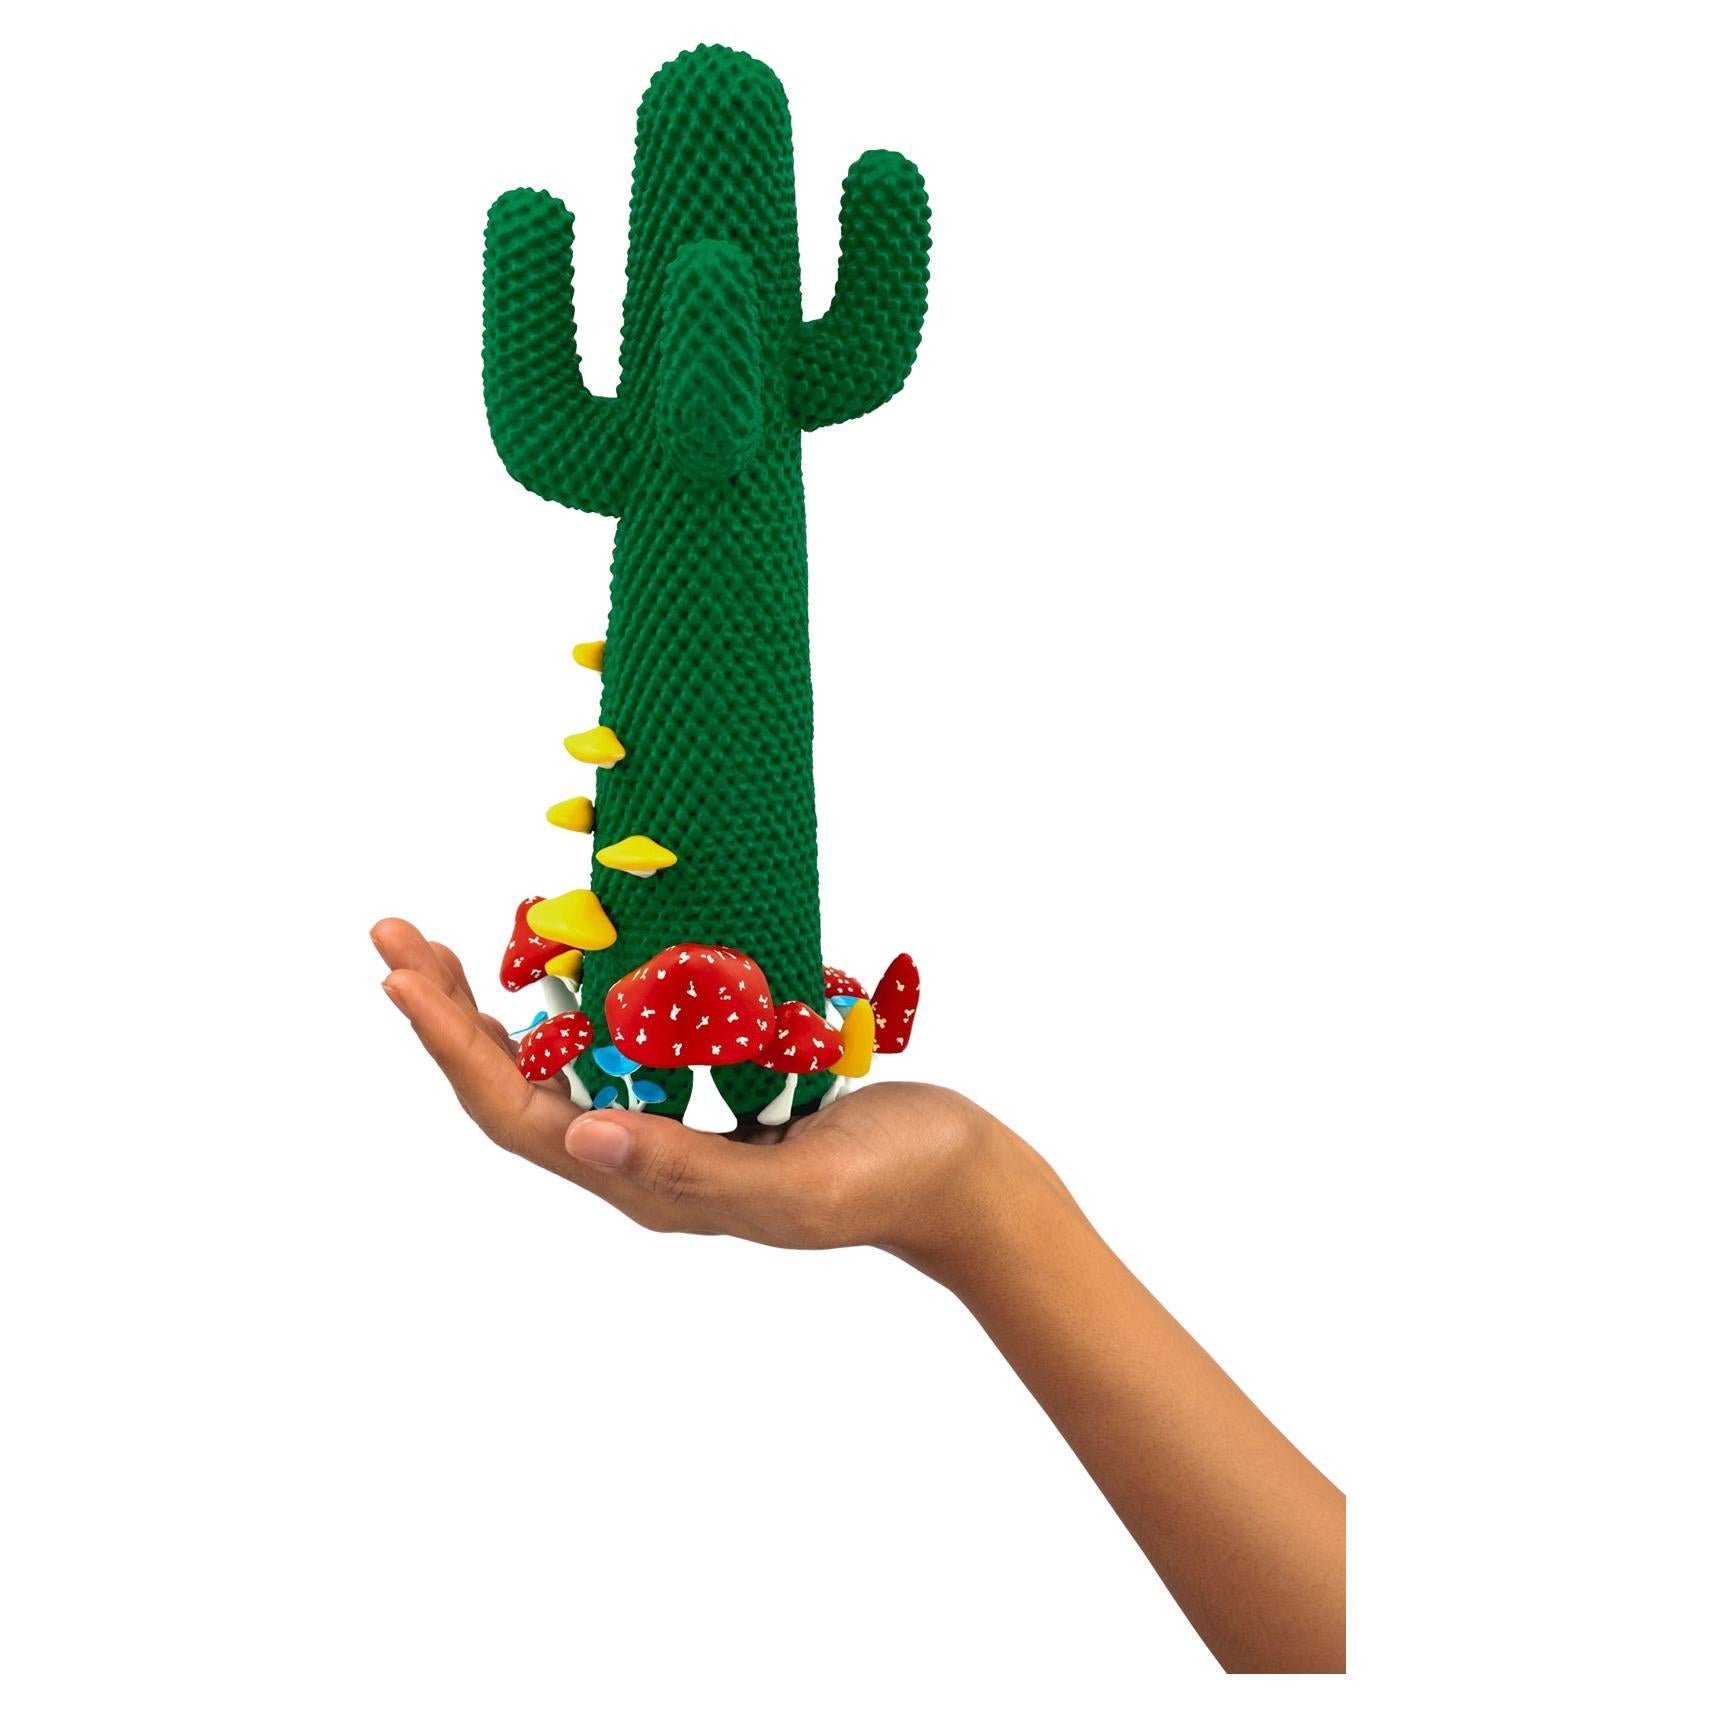 Limited Edition #73/99

Gufram presents the miniaturised version of the Shroom CACTUS® created in collaboration with A$AP Rocky and the artist’s new design studio HOMMEMADE Exactly as the real-size Shroom CACTUS®, the new Guframini piece features